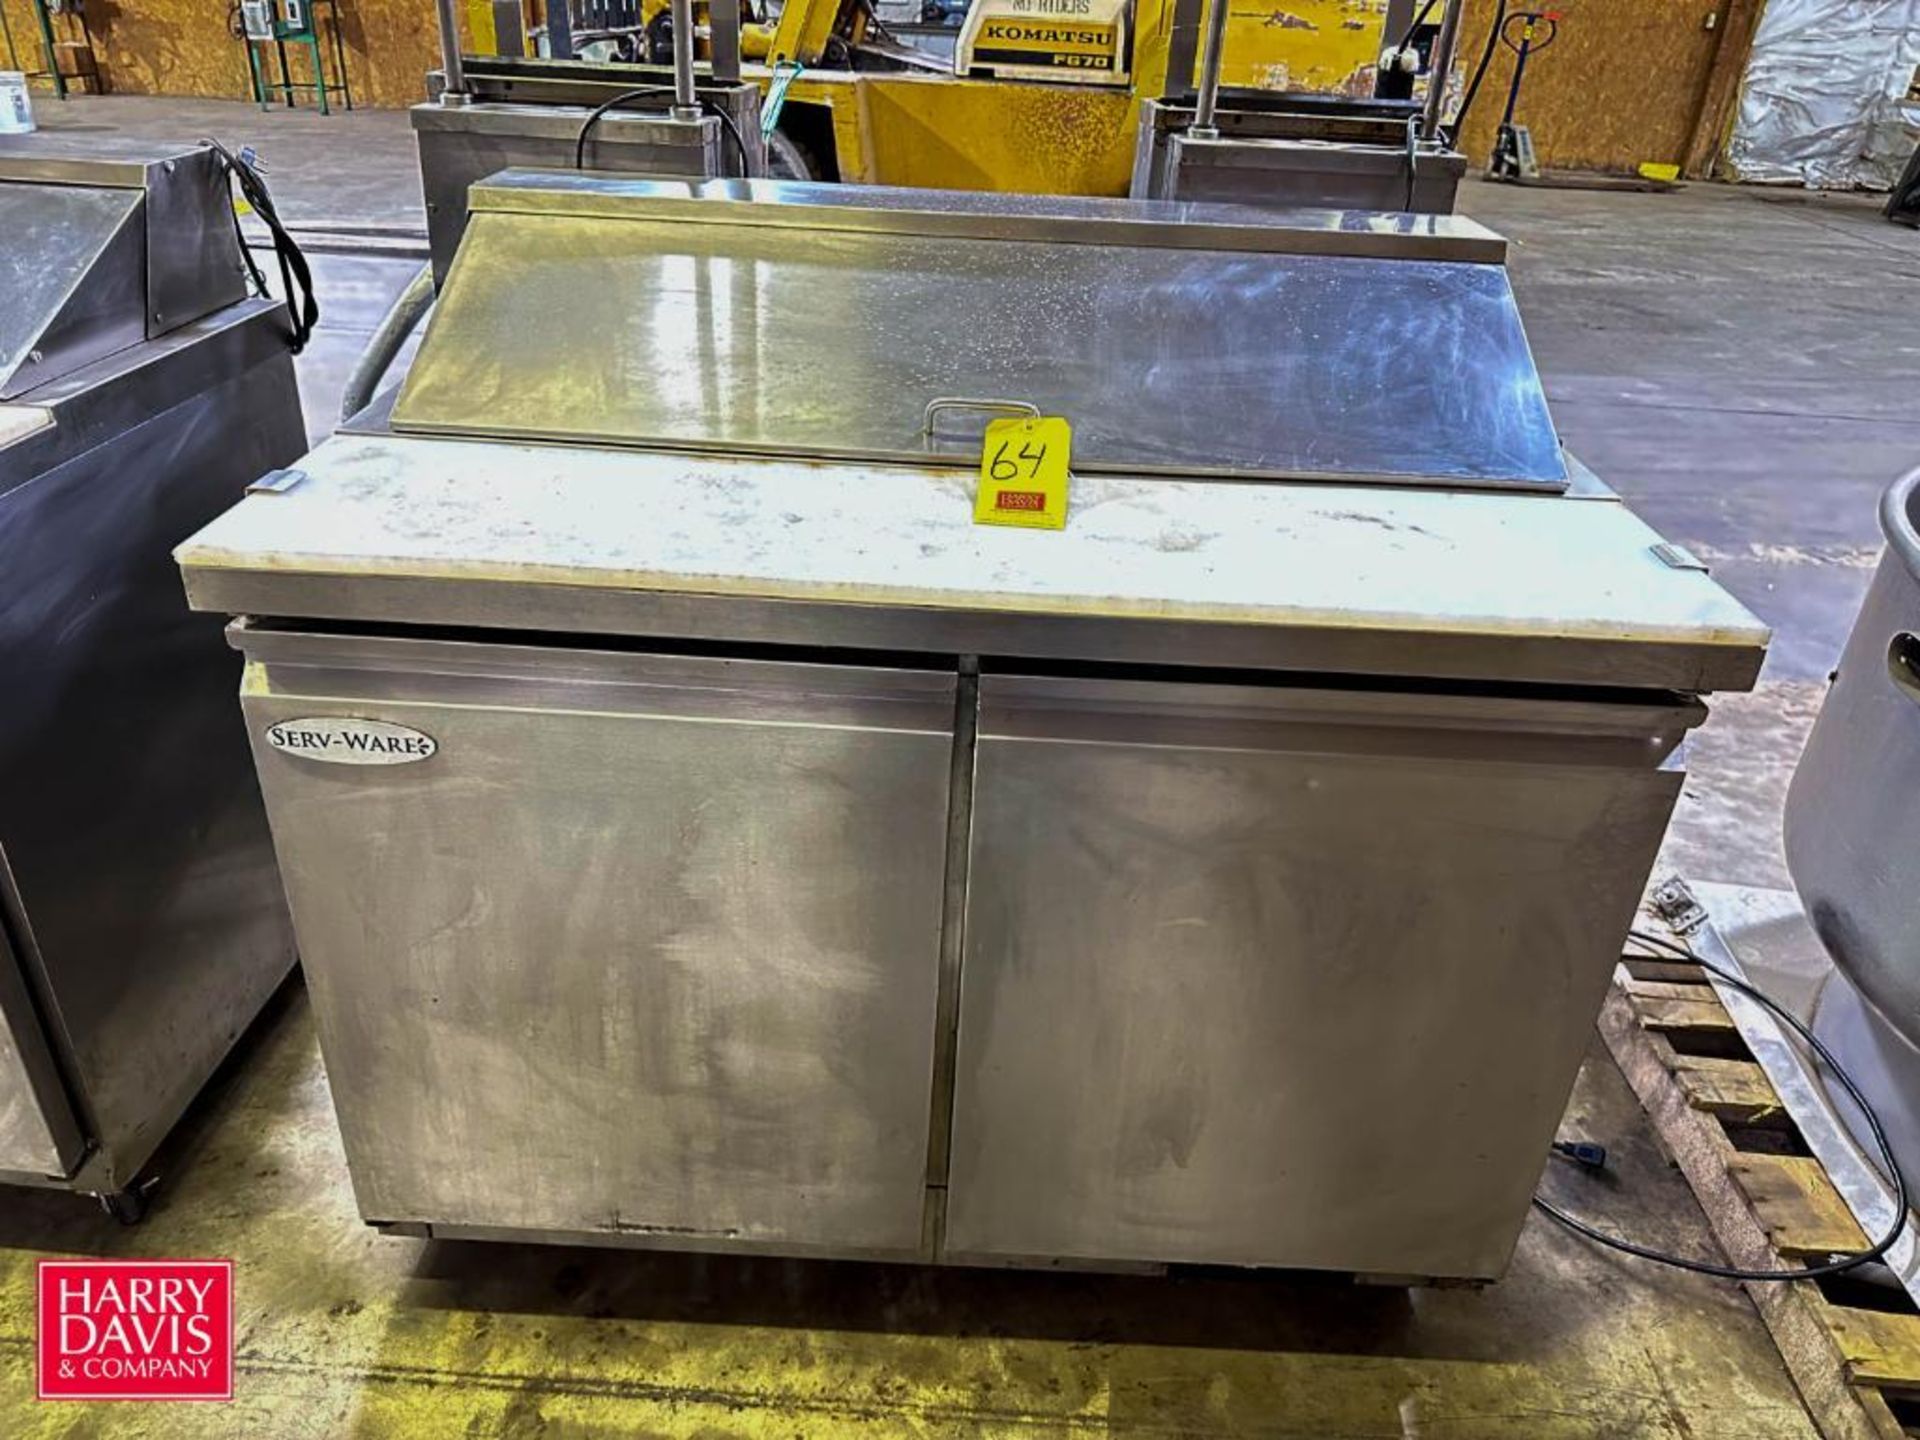 SERV-WARE S/S Portable Commercial Refrigerated Prep Table, Model: SP48-12, S/N: 5039851